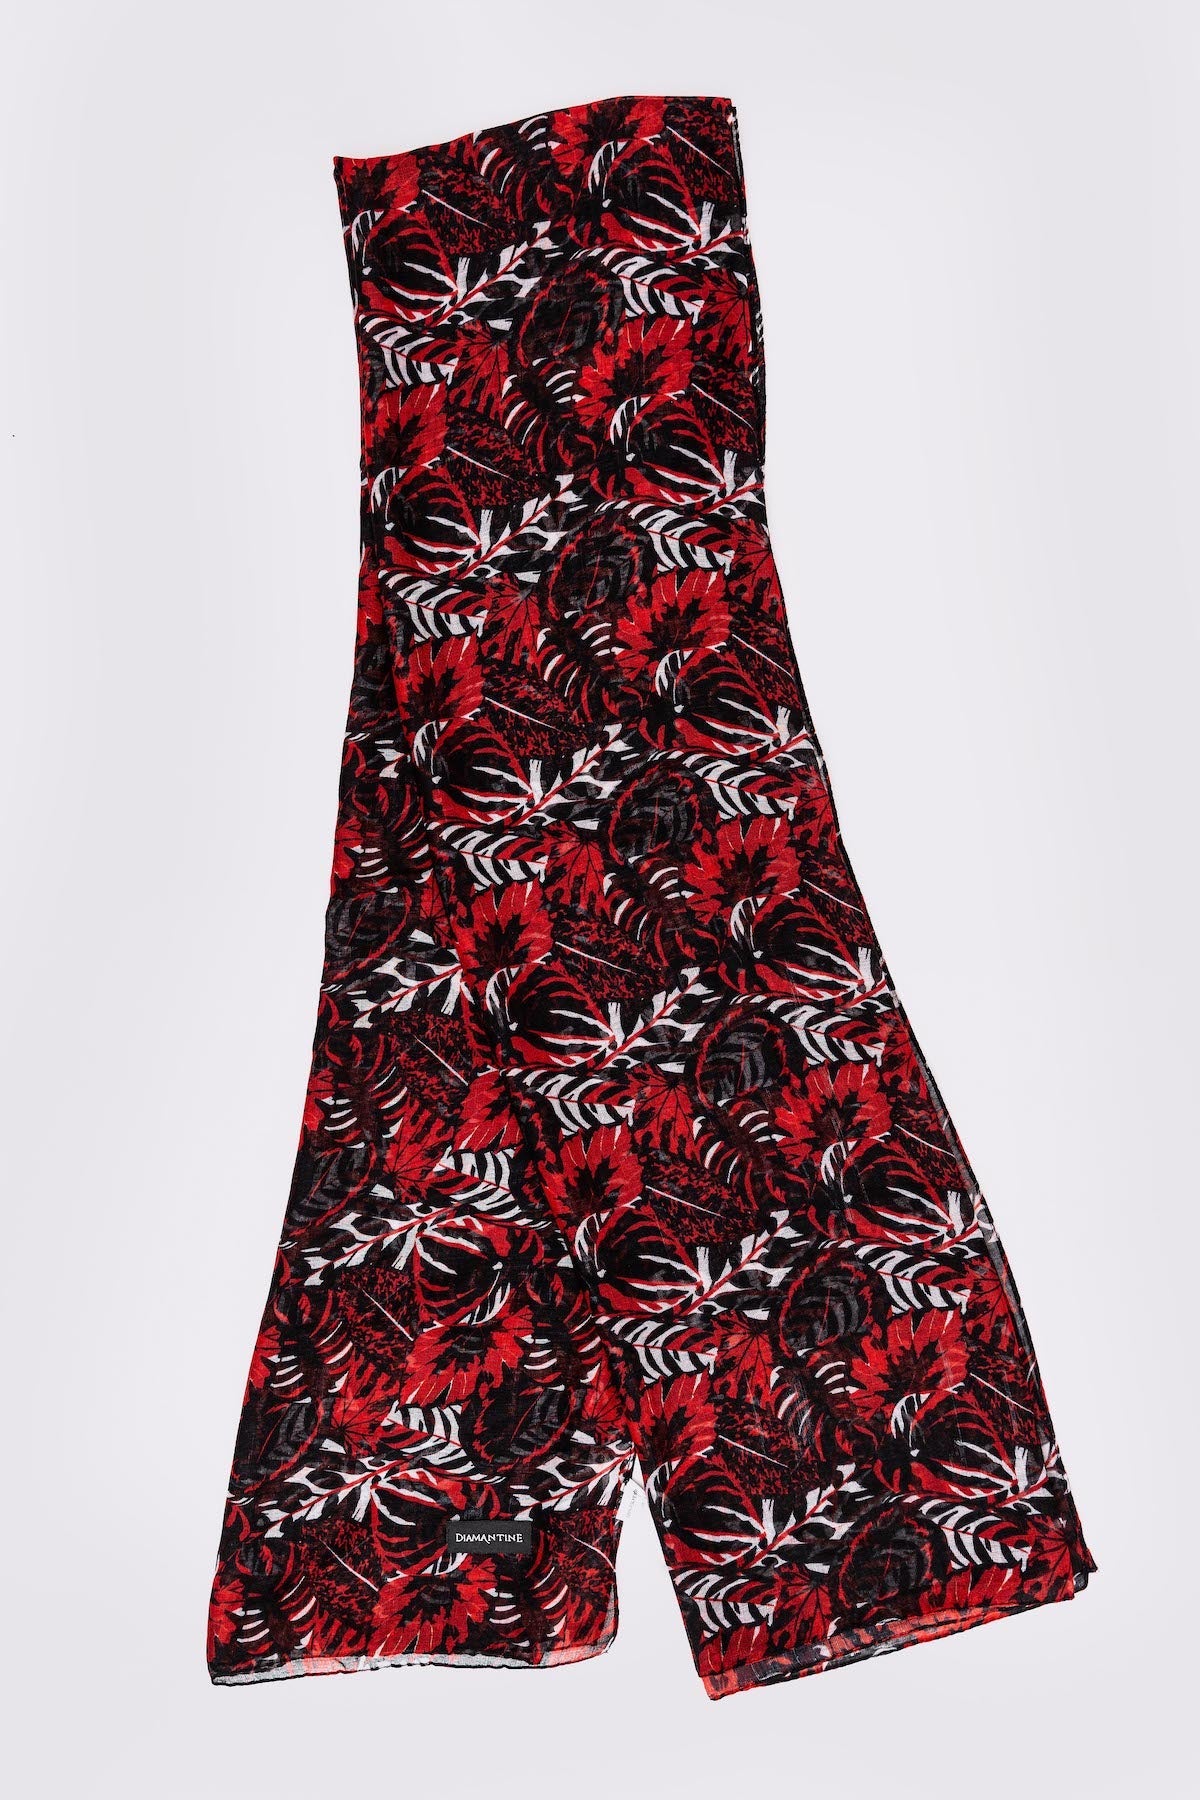 Women's Lightweight Head Scarf in Black & Red Tropical Print